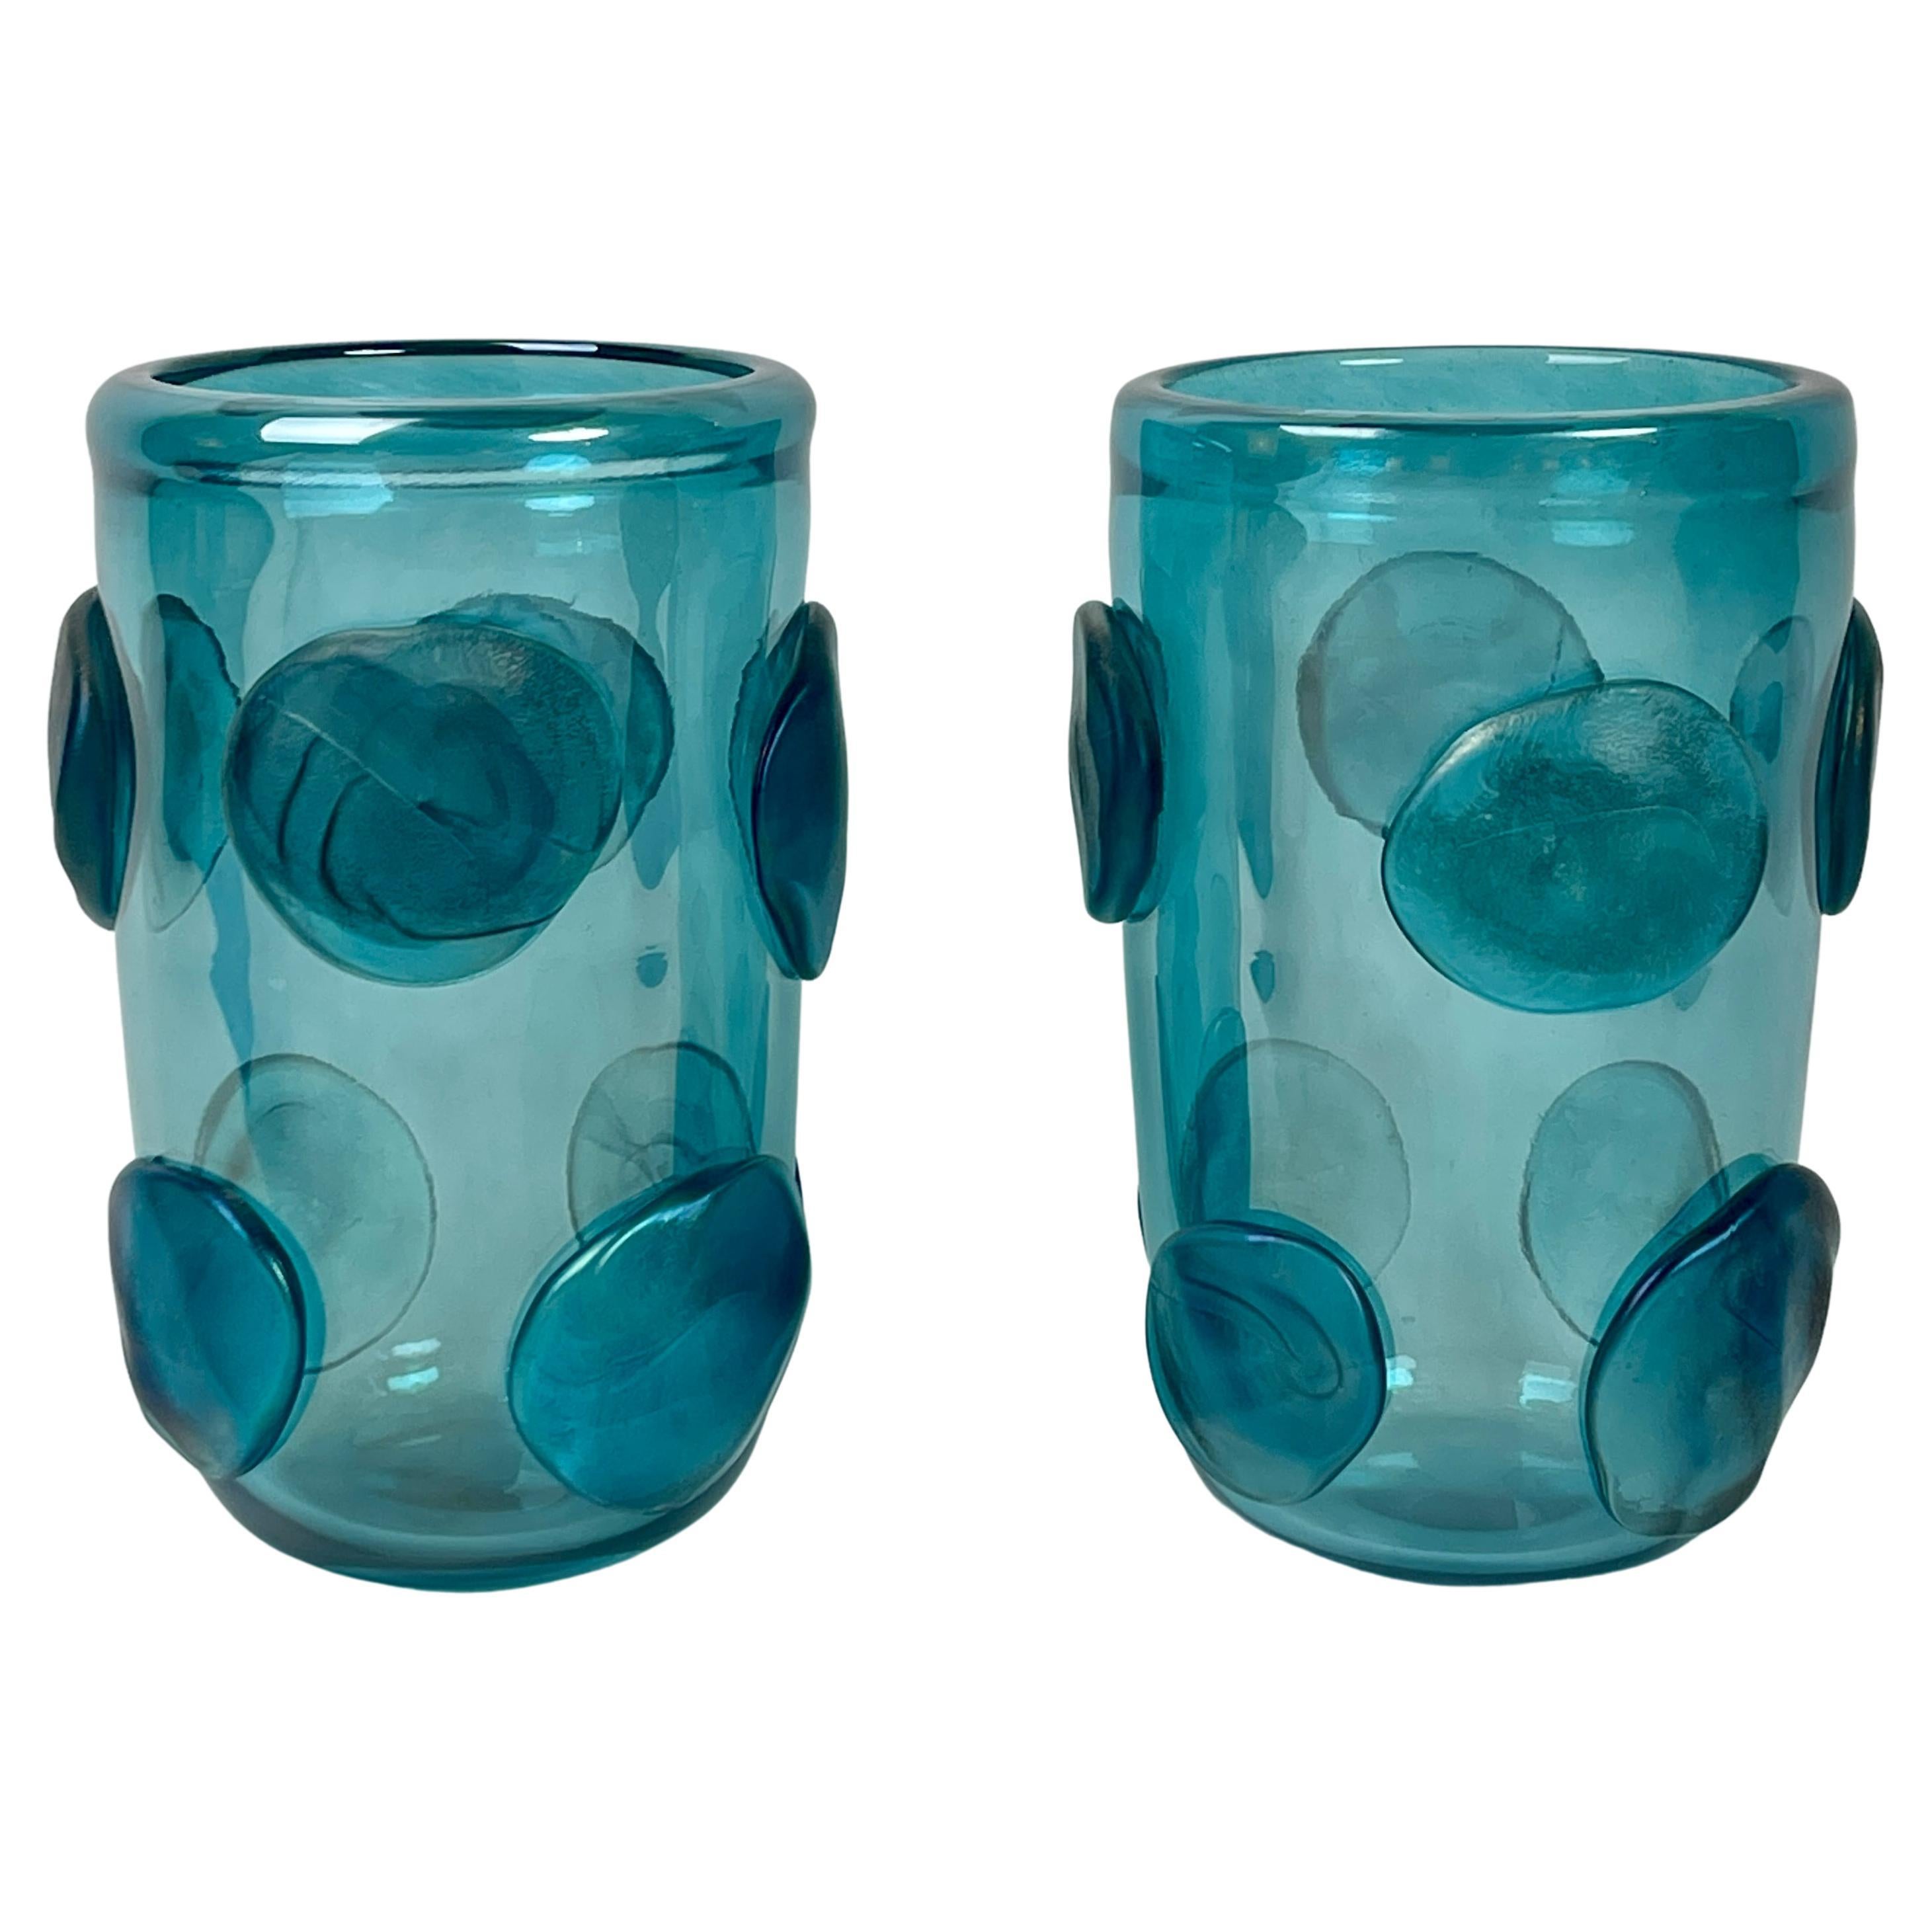 Late 20th Century Pair of Light Blue Murano Art Glass Vases by Costantini